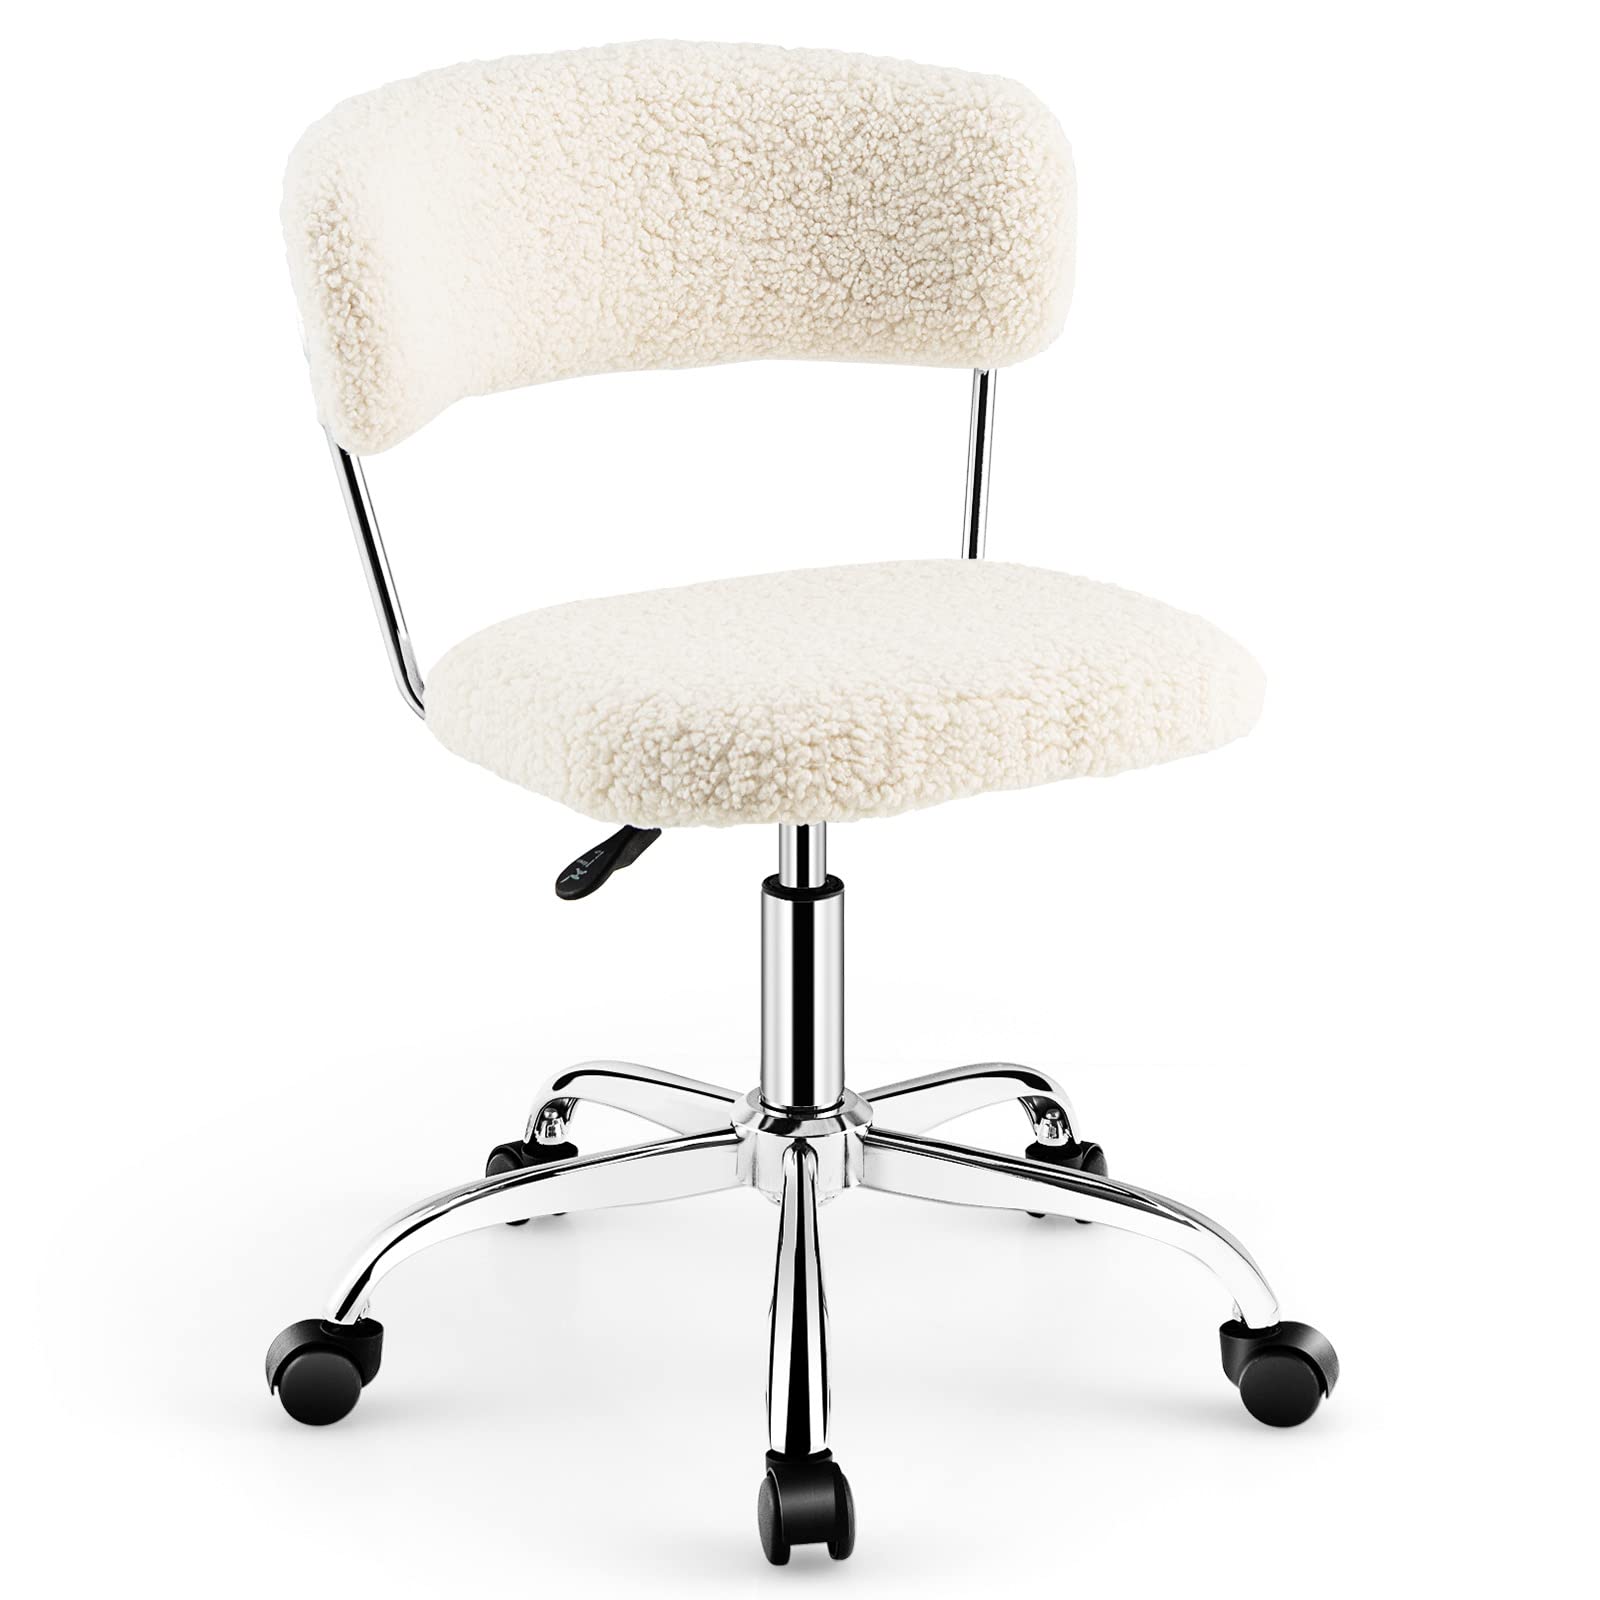 Giantex Home Office Chair, Faux Fur Low Back Swivel Leisure Chair w/Height Adjustable Padded Seat